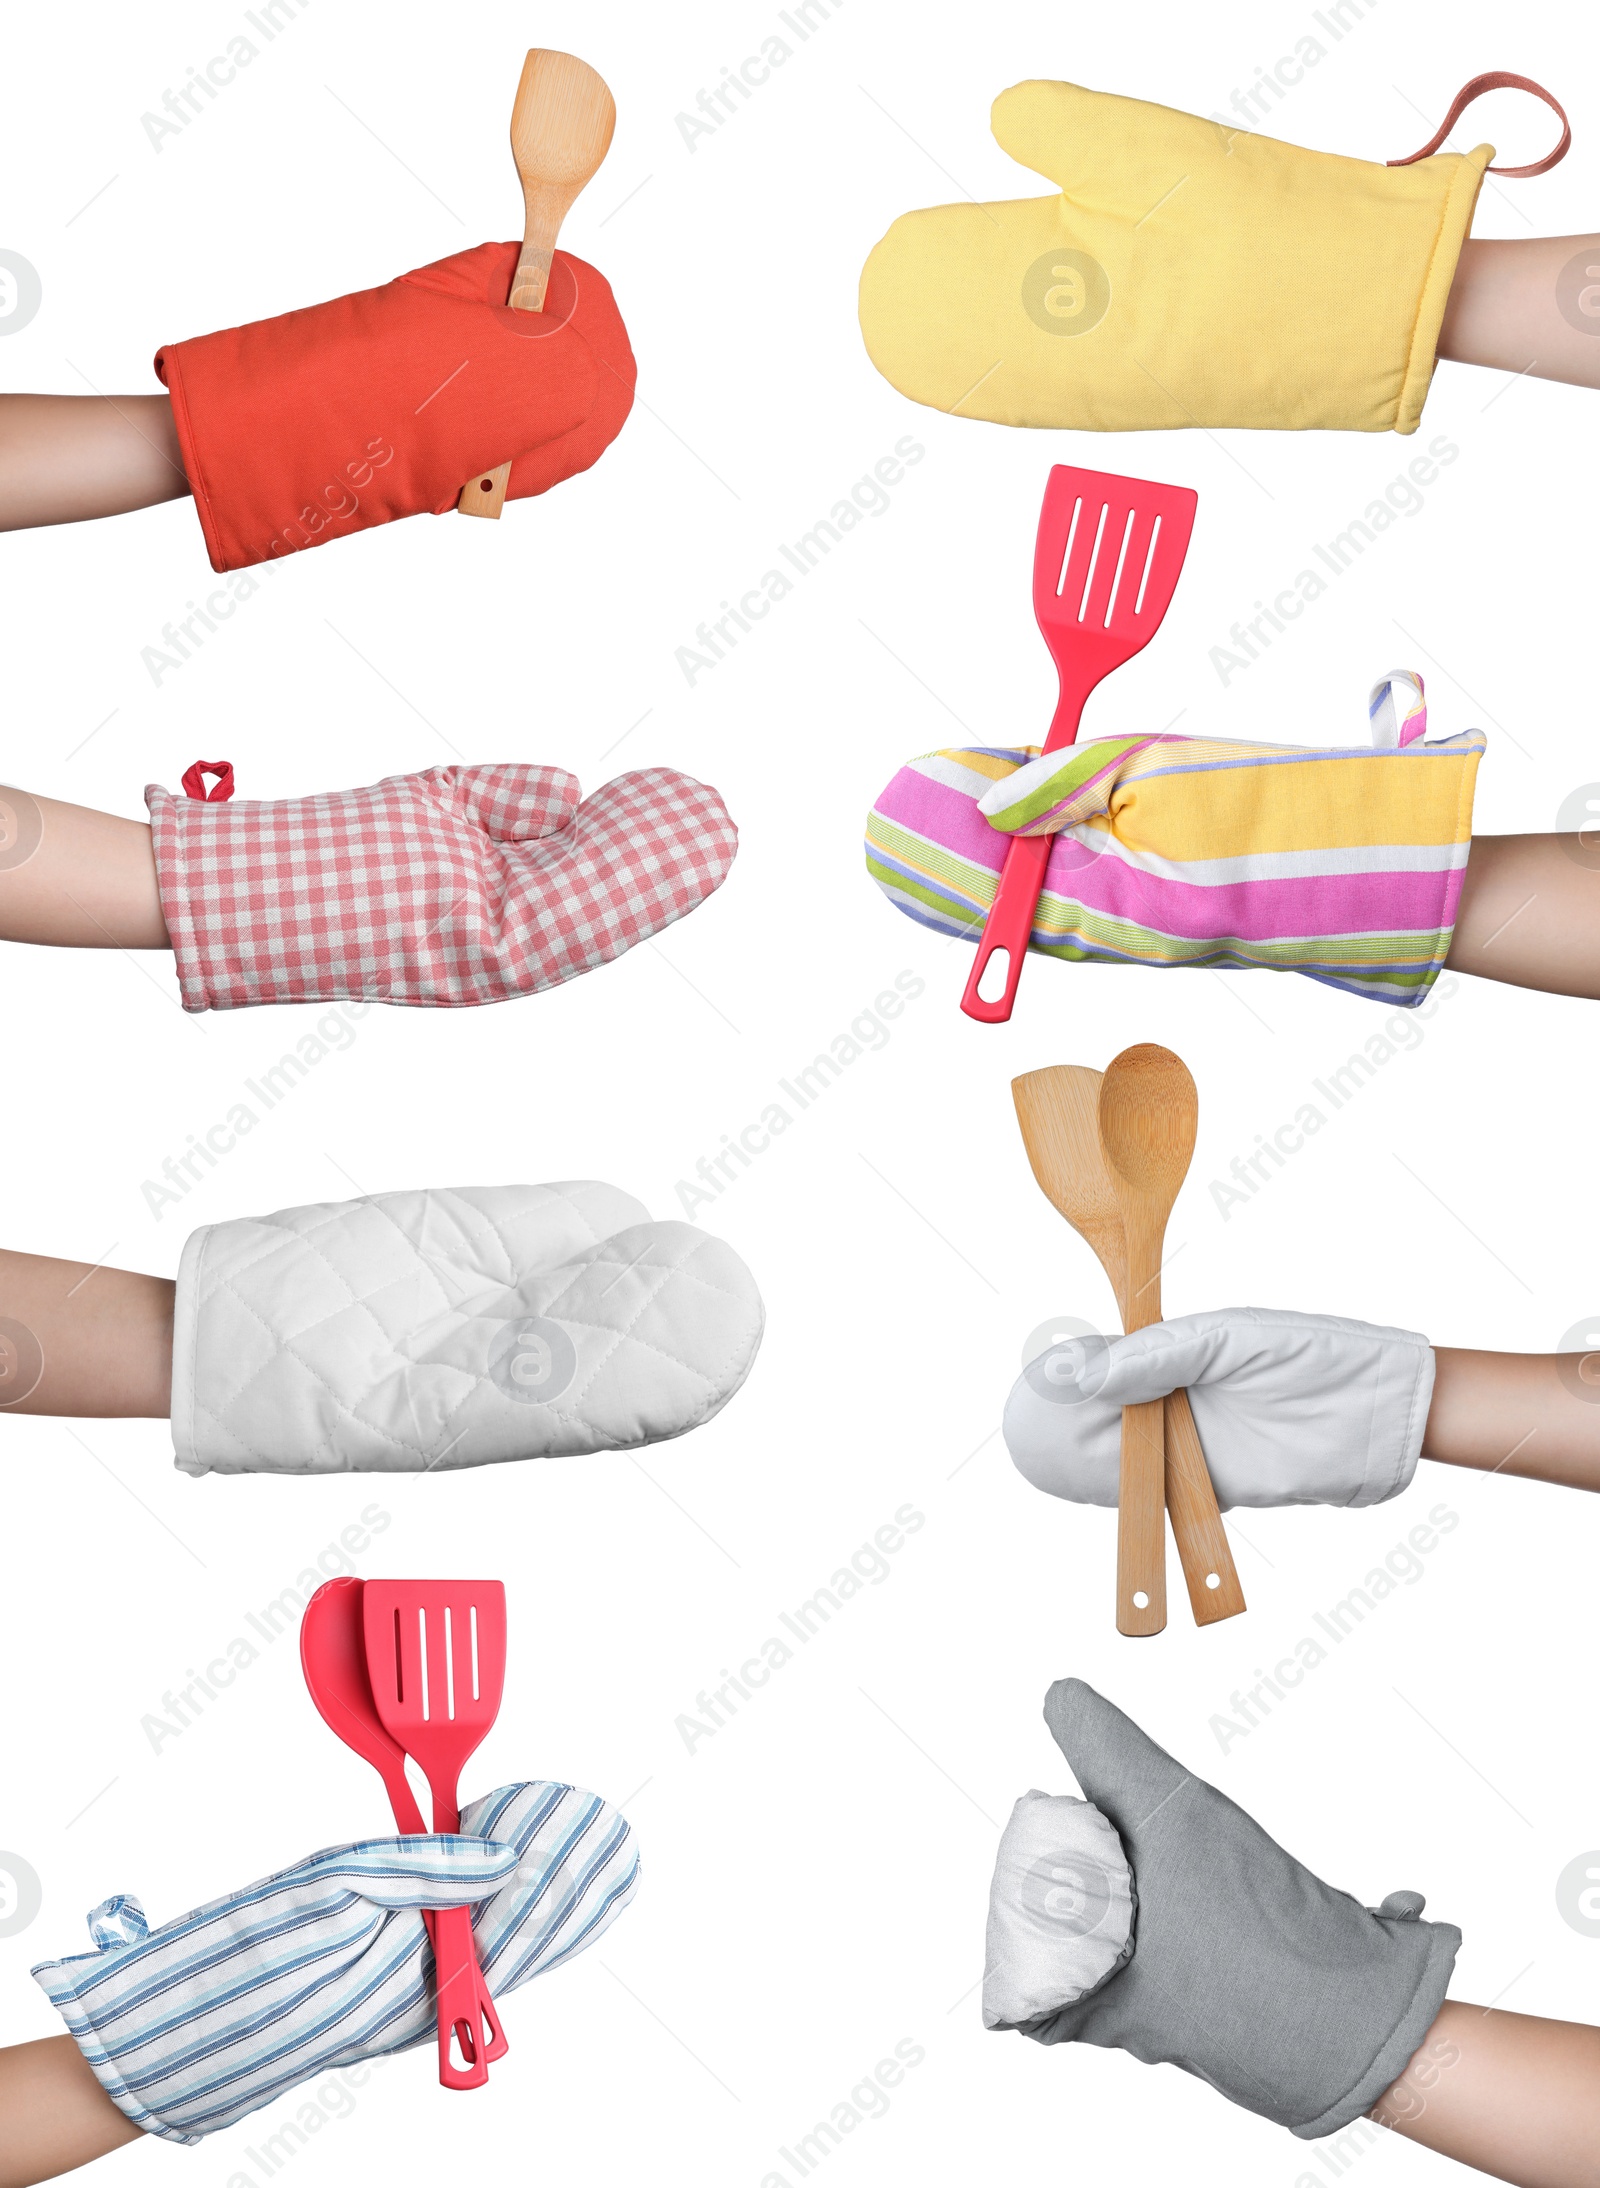 Image of Closeup view of chefs in oven gloves holding utensils, collage 